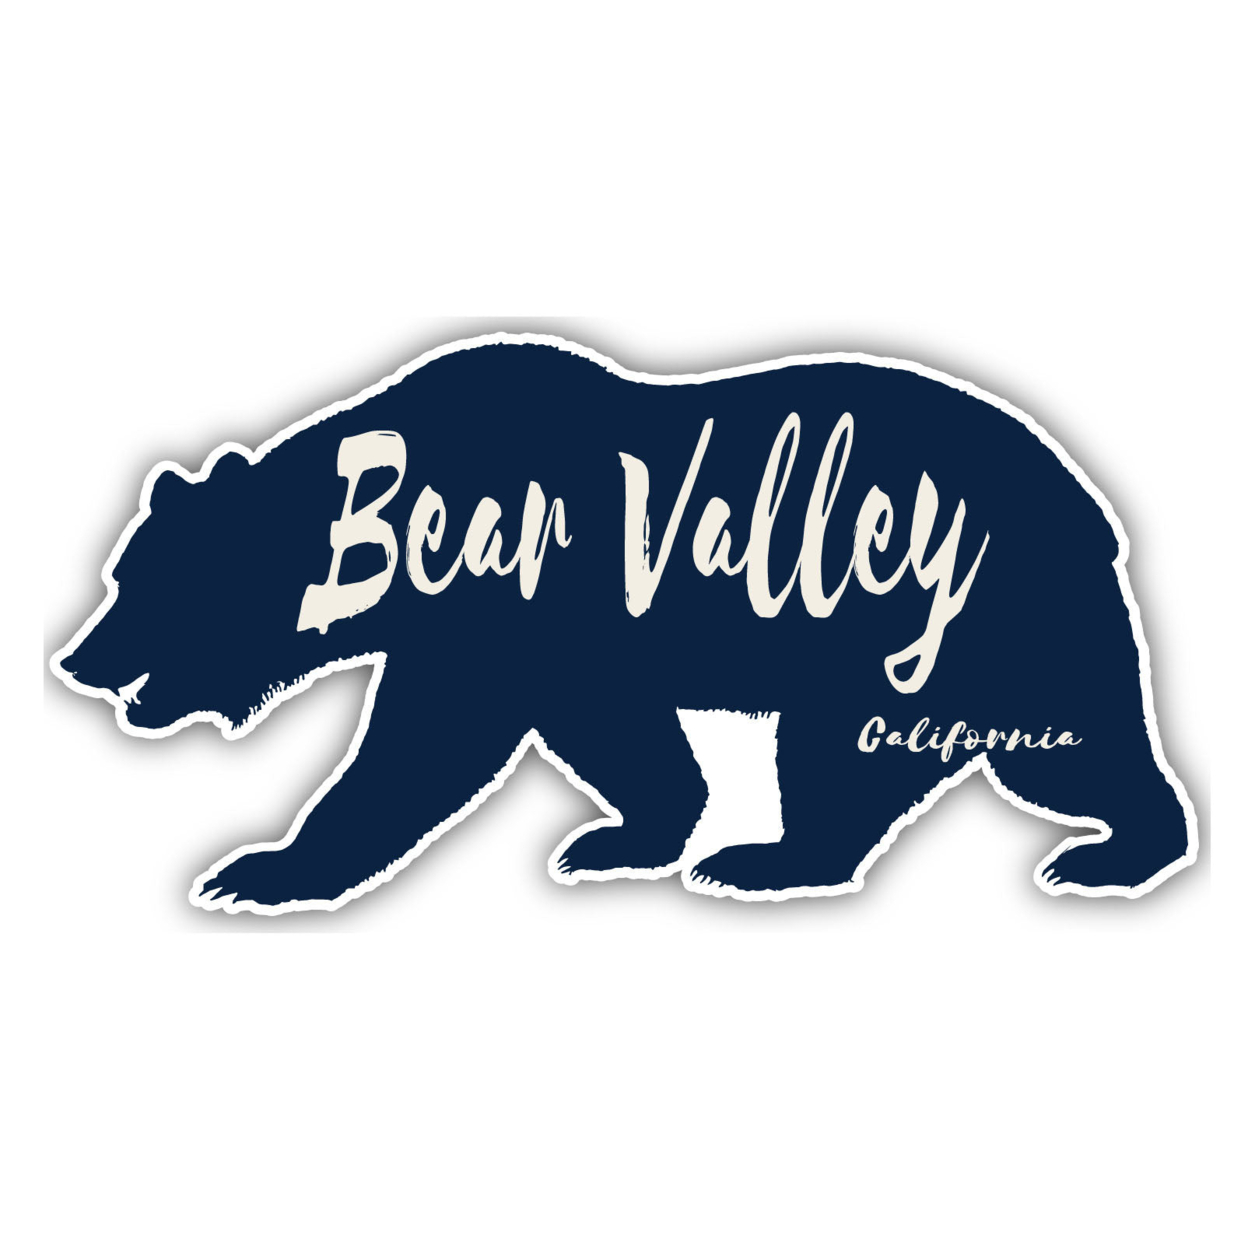 Bear Valley California Souvenir Decorative Stickers (Choose Theme And Size) - 4-Pack, 12-Inch, Great Outdoors